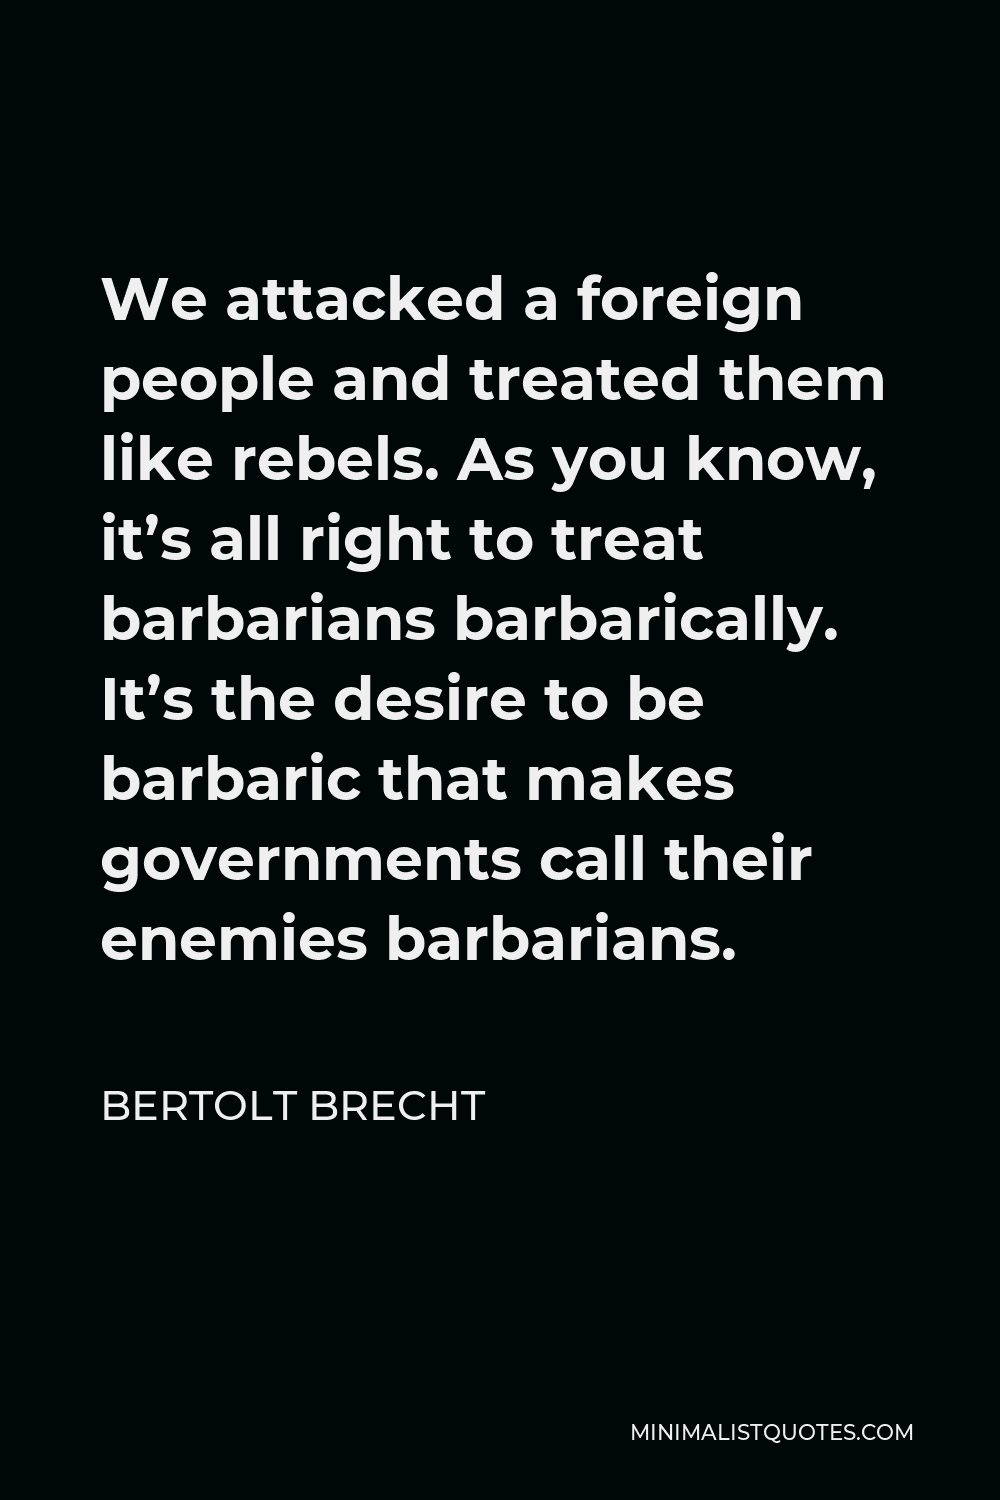 Bertolt Brecht Quote - We attacked a foreign people and treated them like rebels. As you know, it’s all right to treat barbarians barbarically. It’s the desire to be barbaric that makes governments call their enemies barbarians.